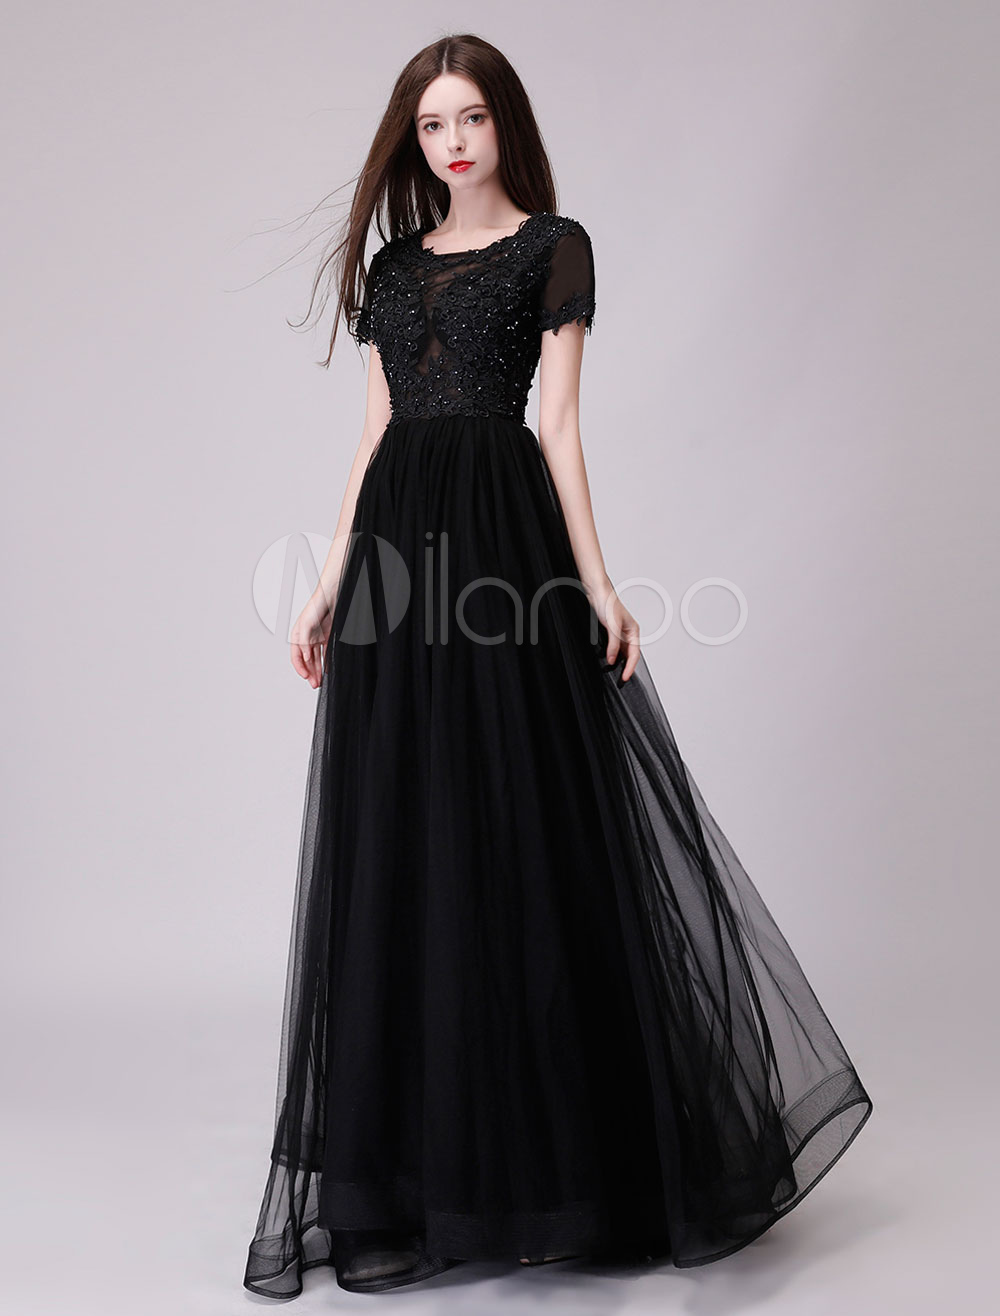 Black Prom Dresses Long Lace Tulle Short Sleeve Maxi Formal Evening ...